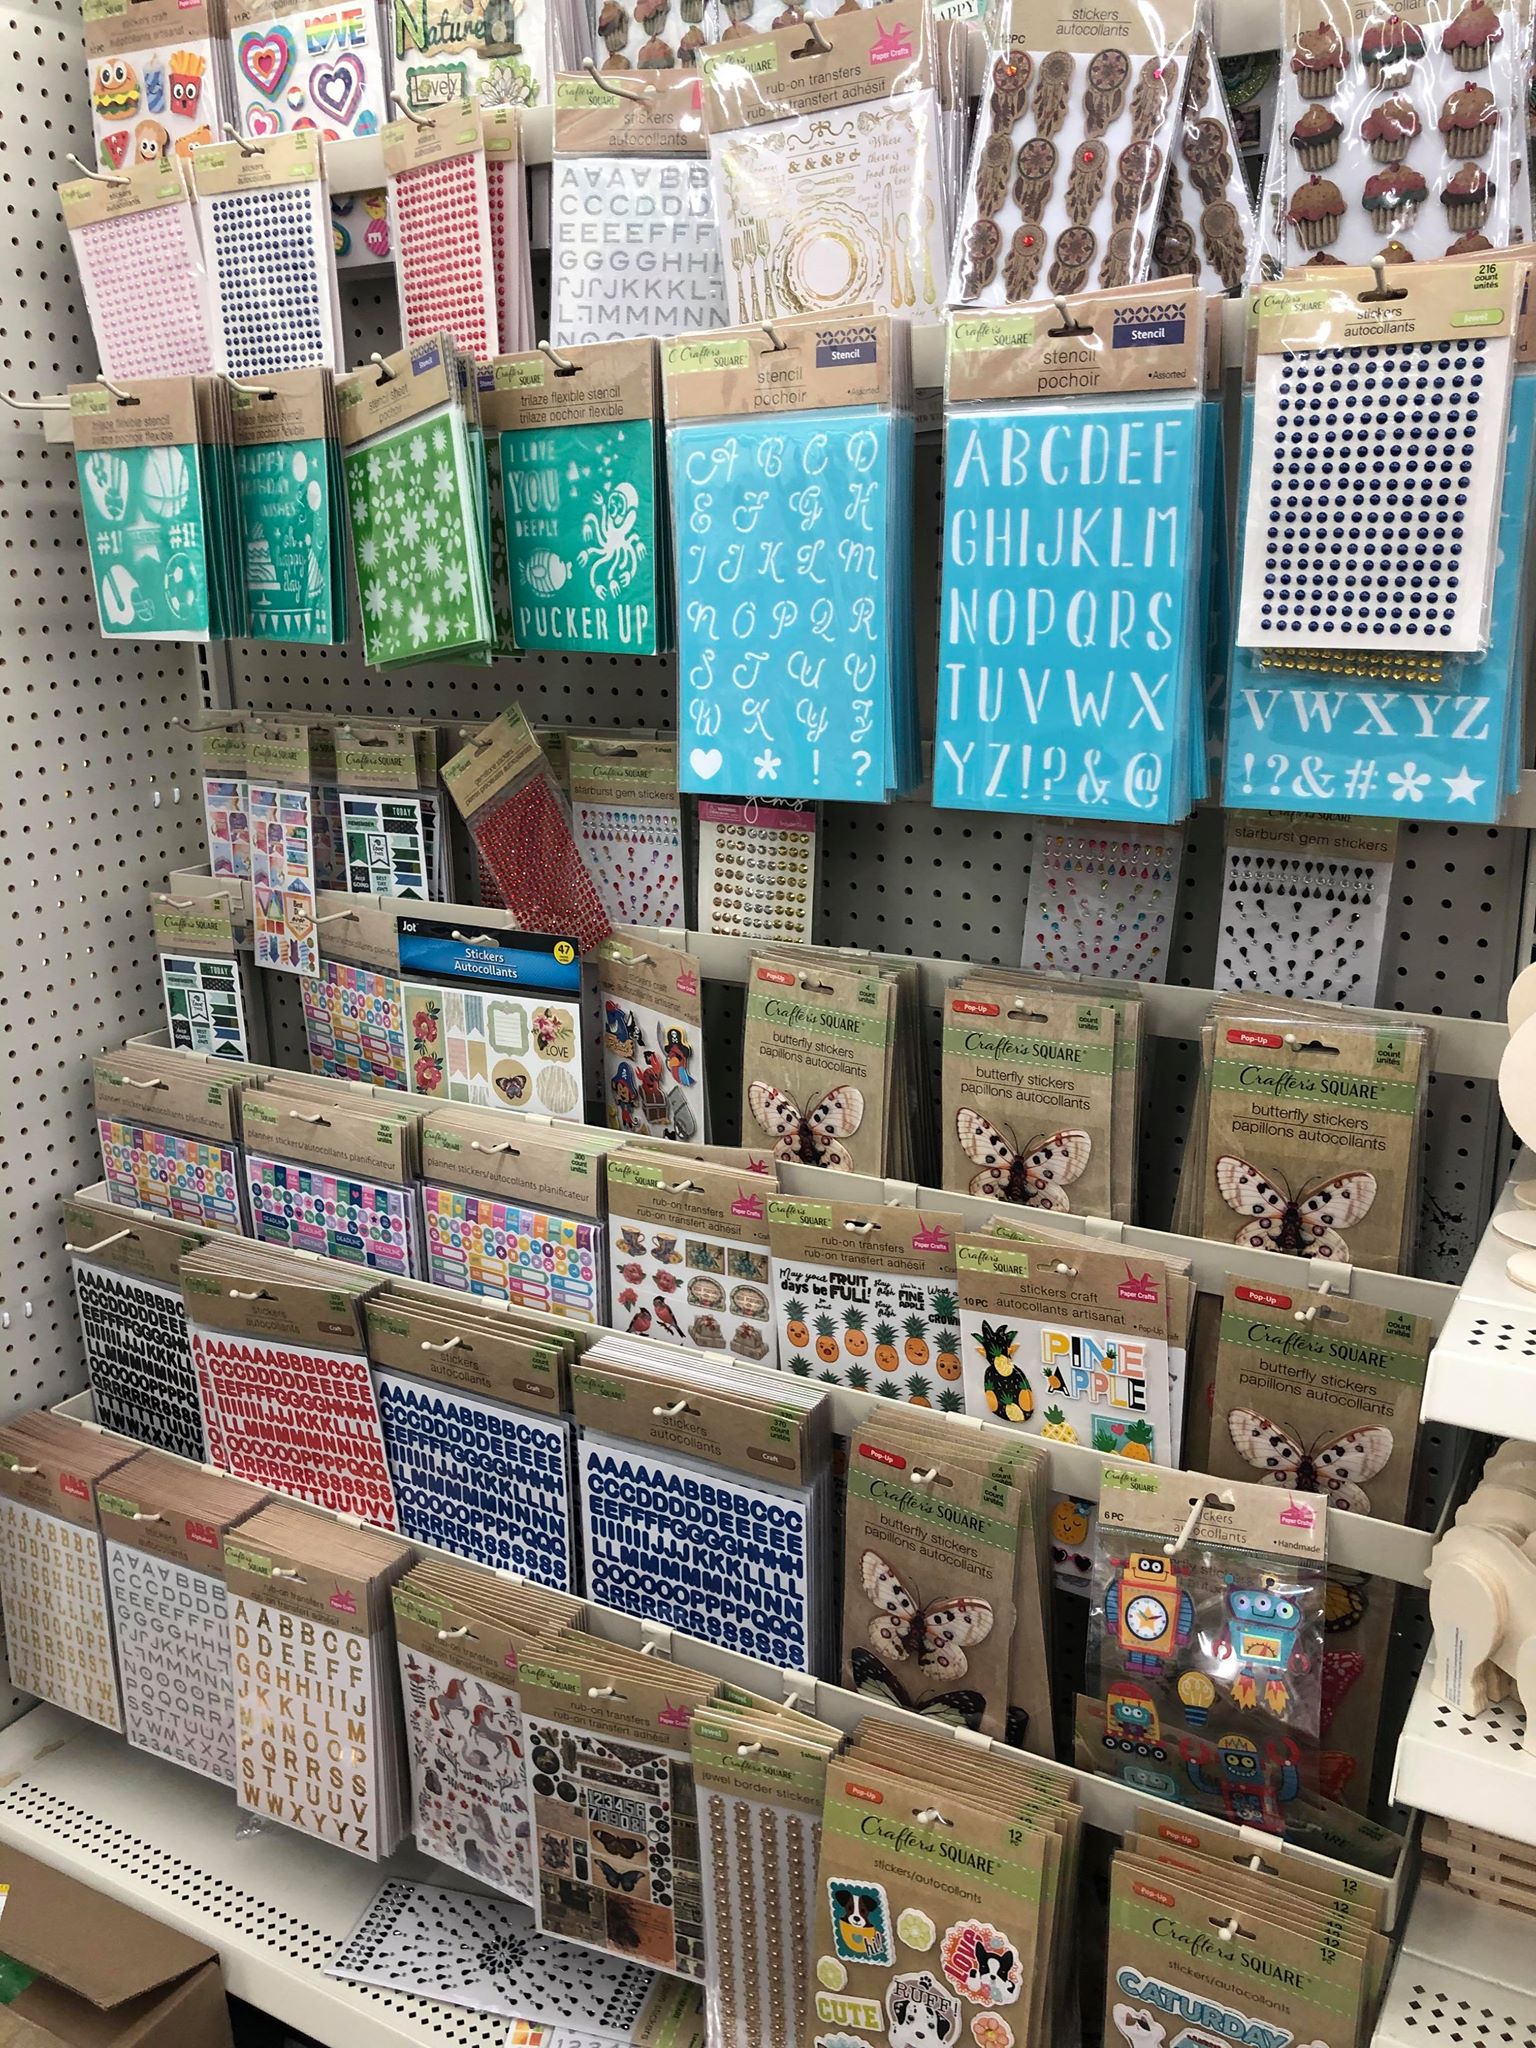 NEW Dollar Tree Crafter's Square Clear Stamps What's New Wednesday